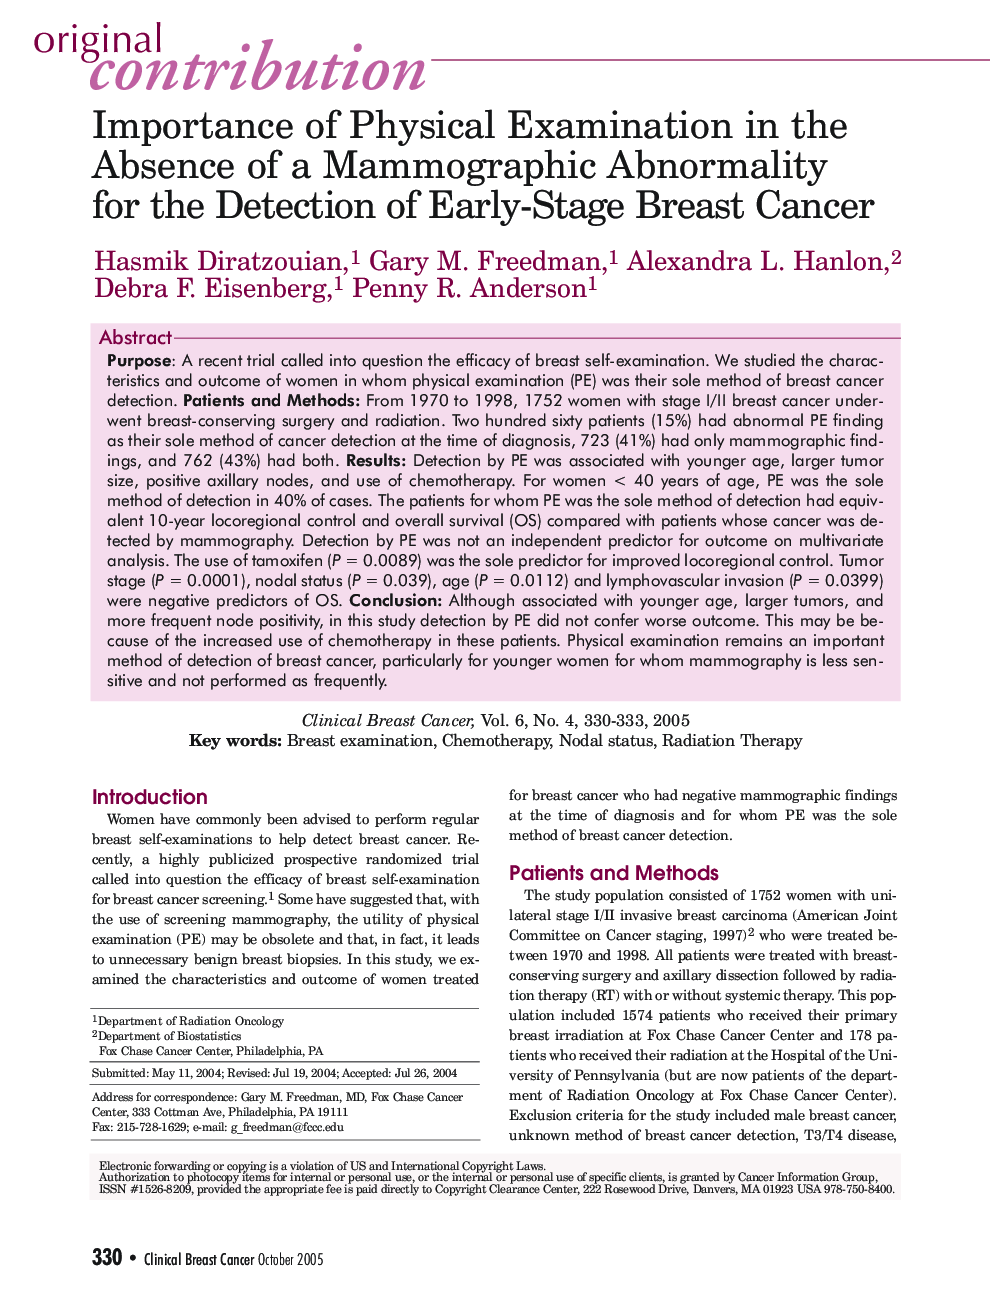 Importance of Physical Examination in the Absence of a Mammographic Abnormality for the Detection of Early-Stage Breast Cancer